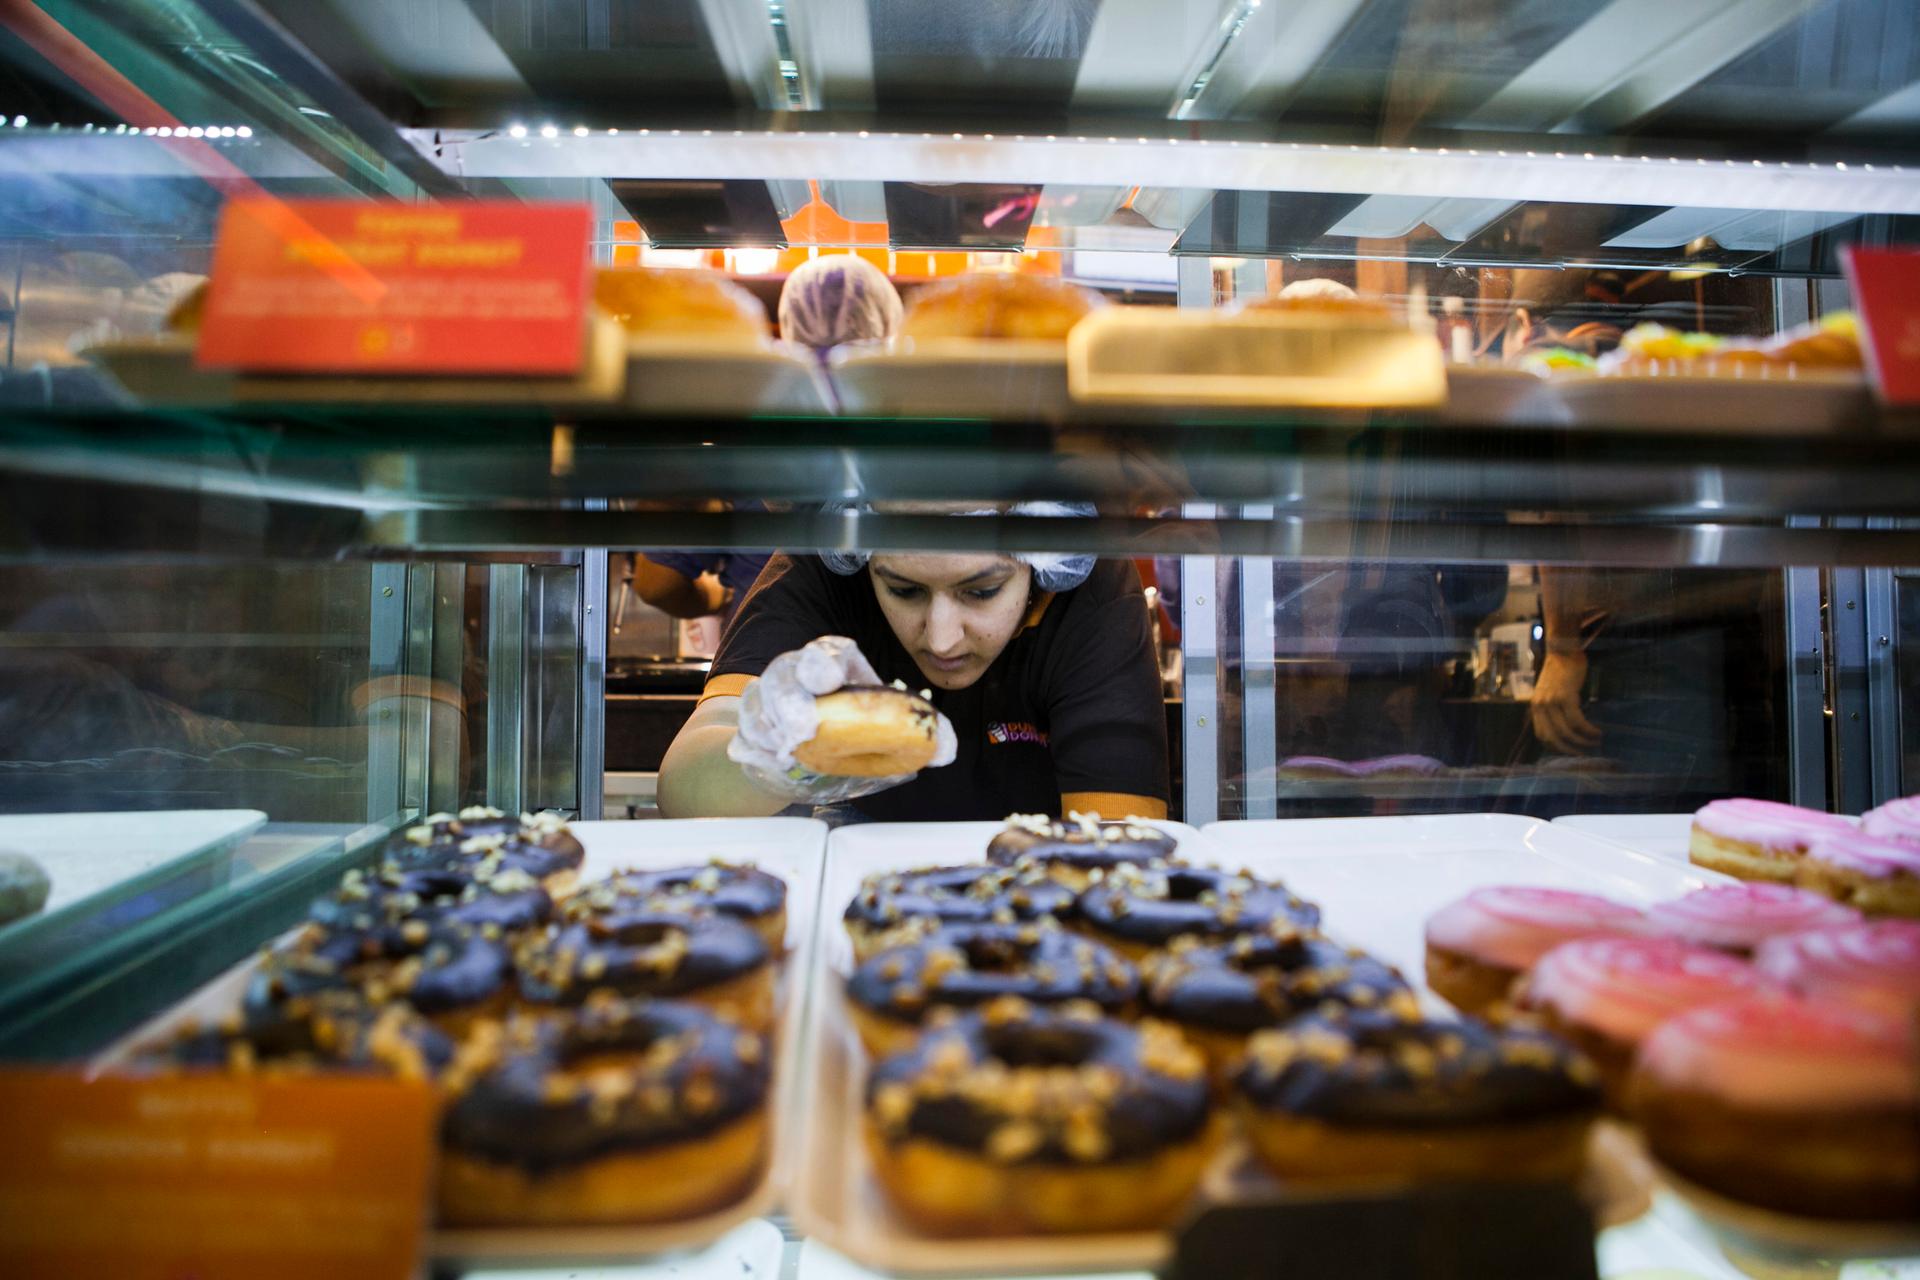 An employee takes a donut from a display cabinet at the Dunkin' Donuts store in New Delhi, India.